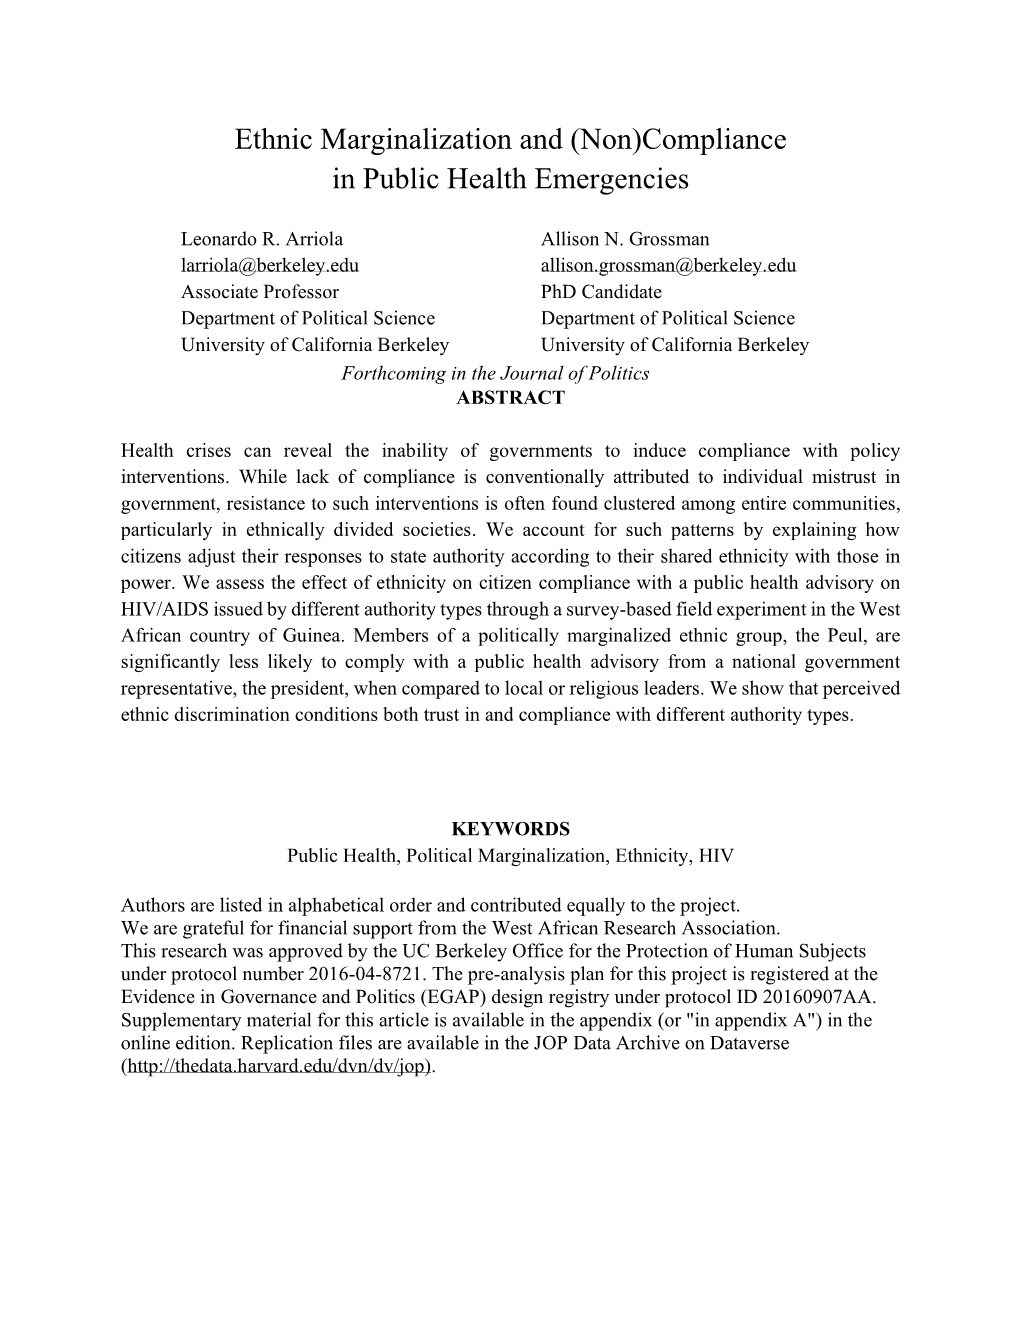 Ethnic Marginalization and (Non)Compliance in Public Health Emergencies